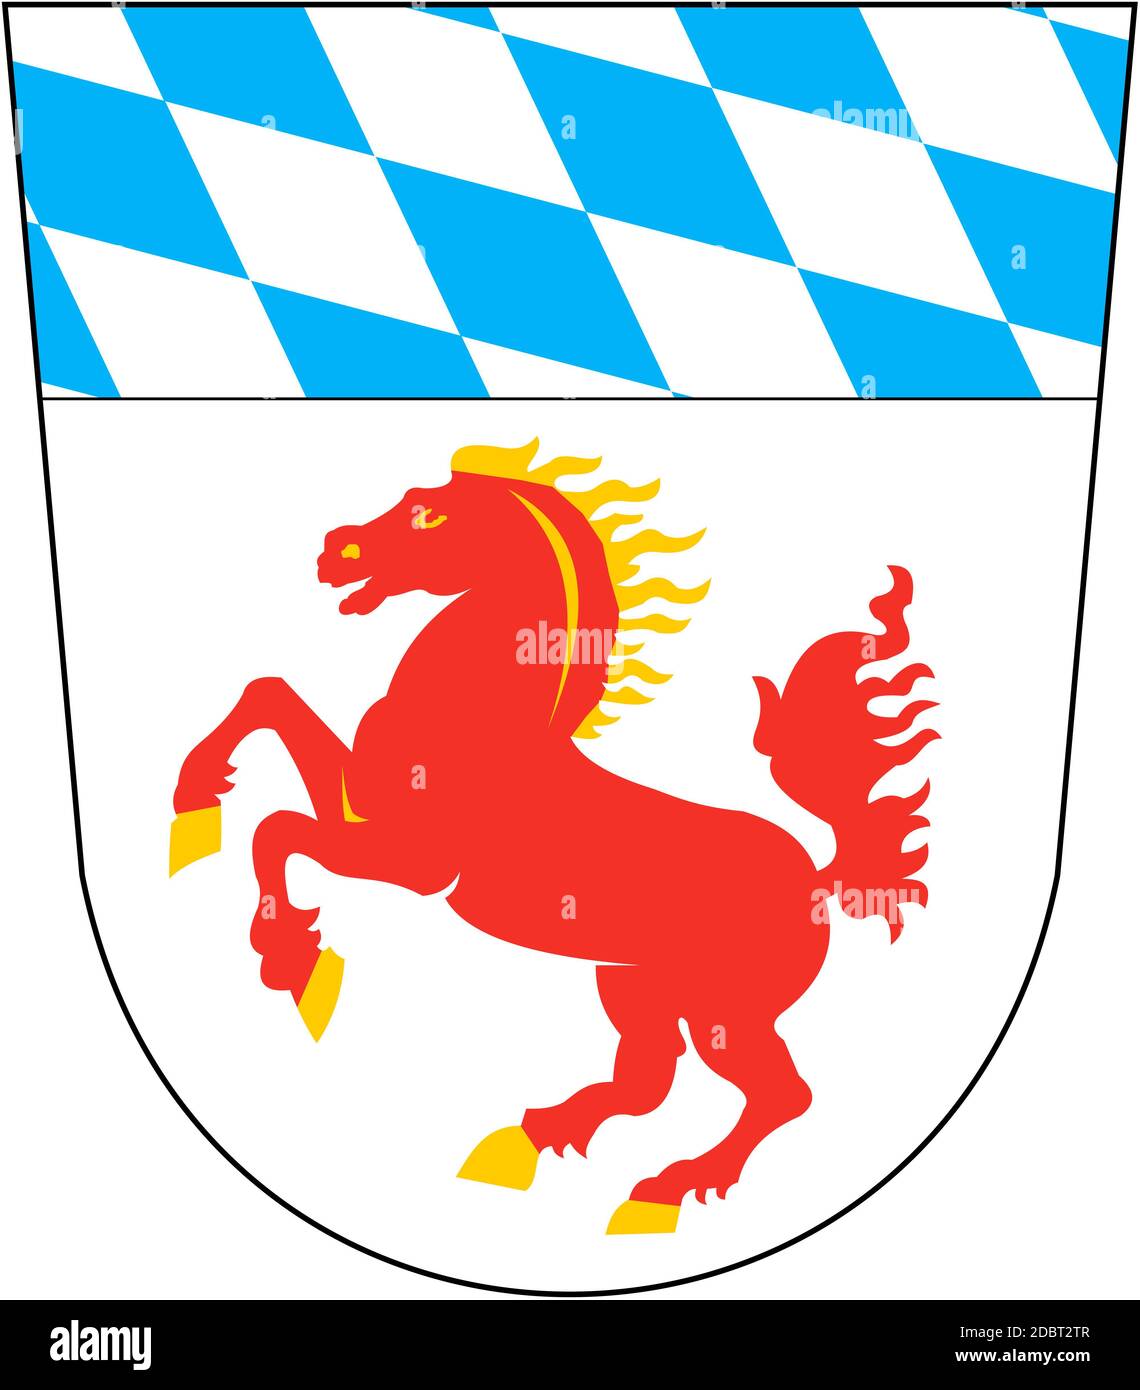 Coat of arms of the Erding district. Germany Stock Photo